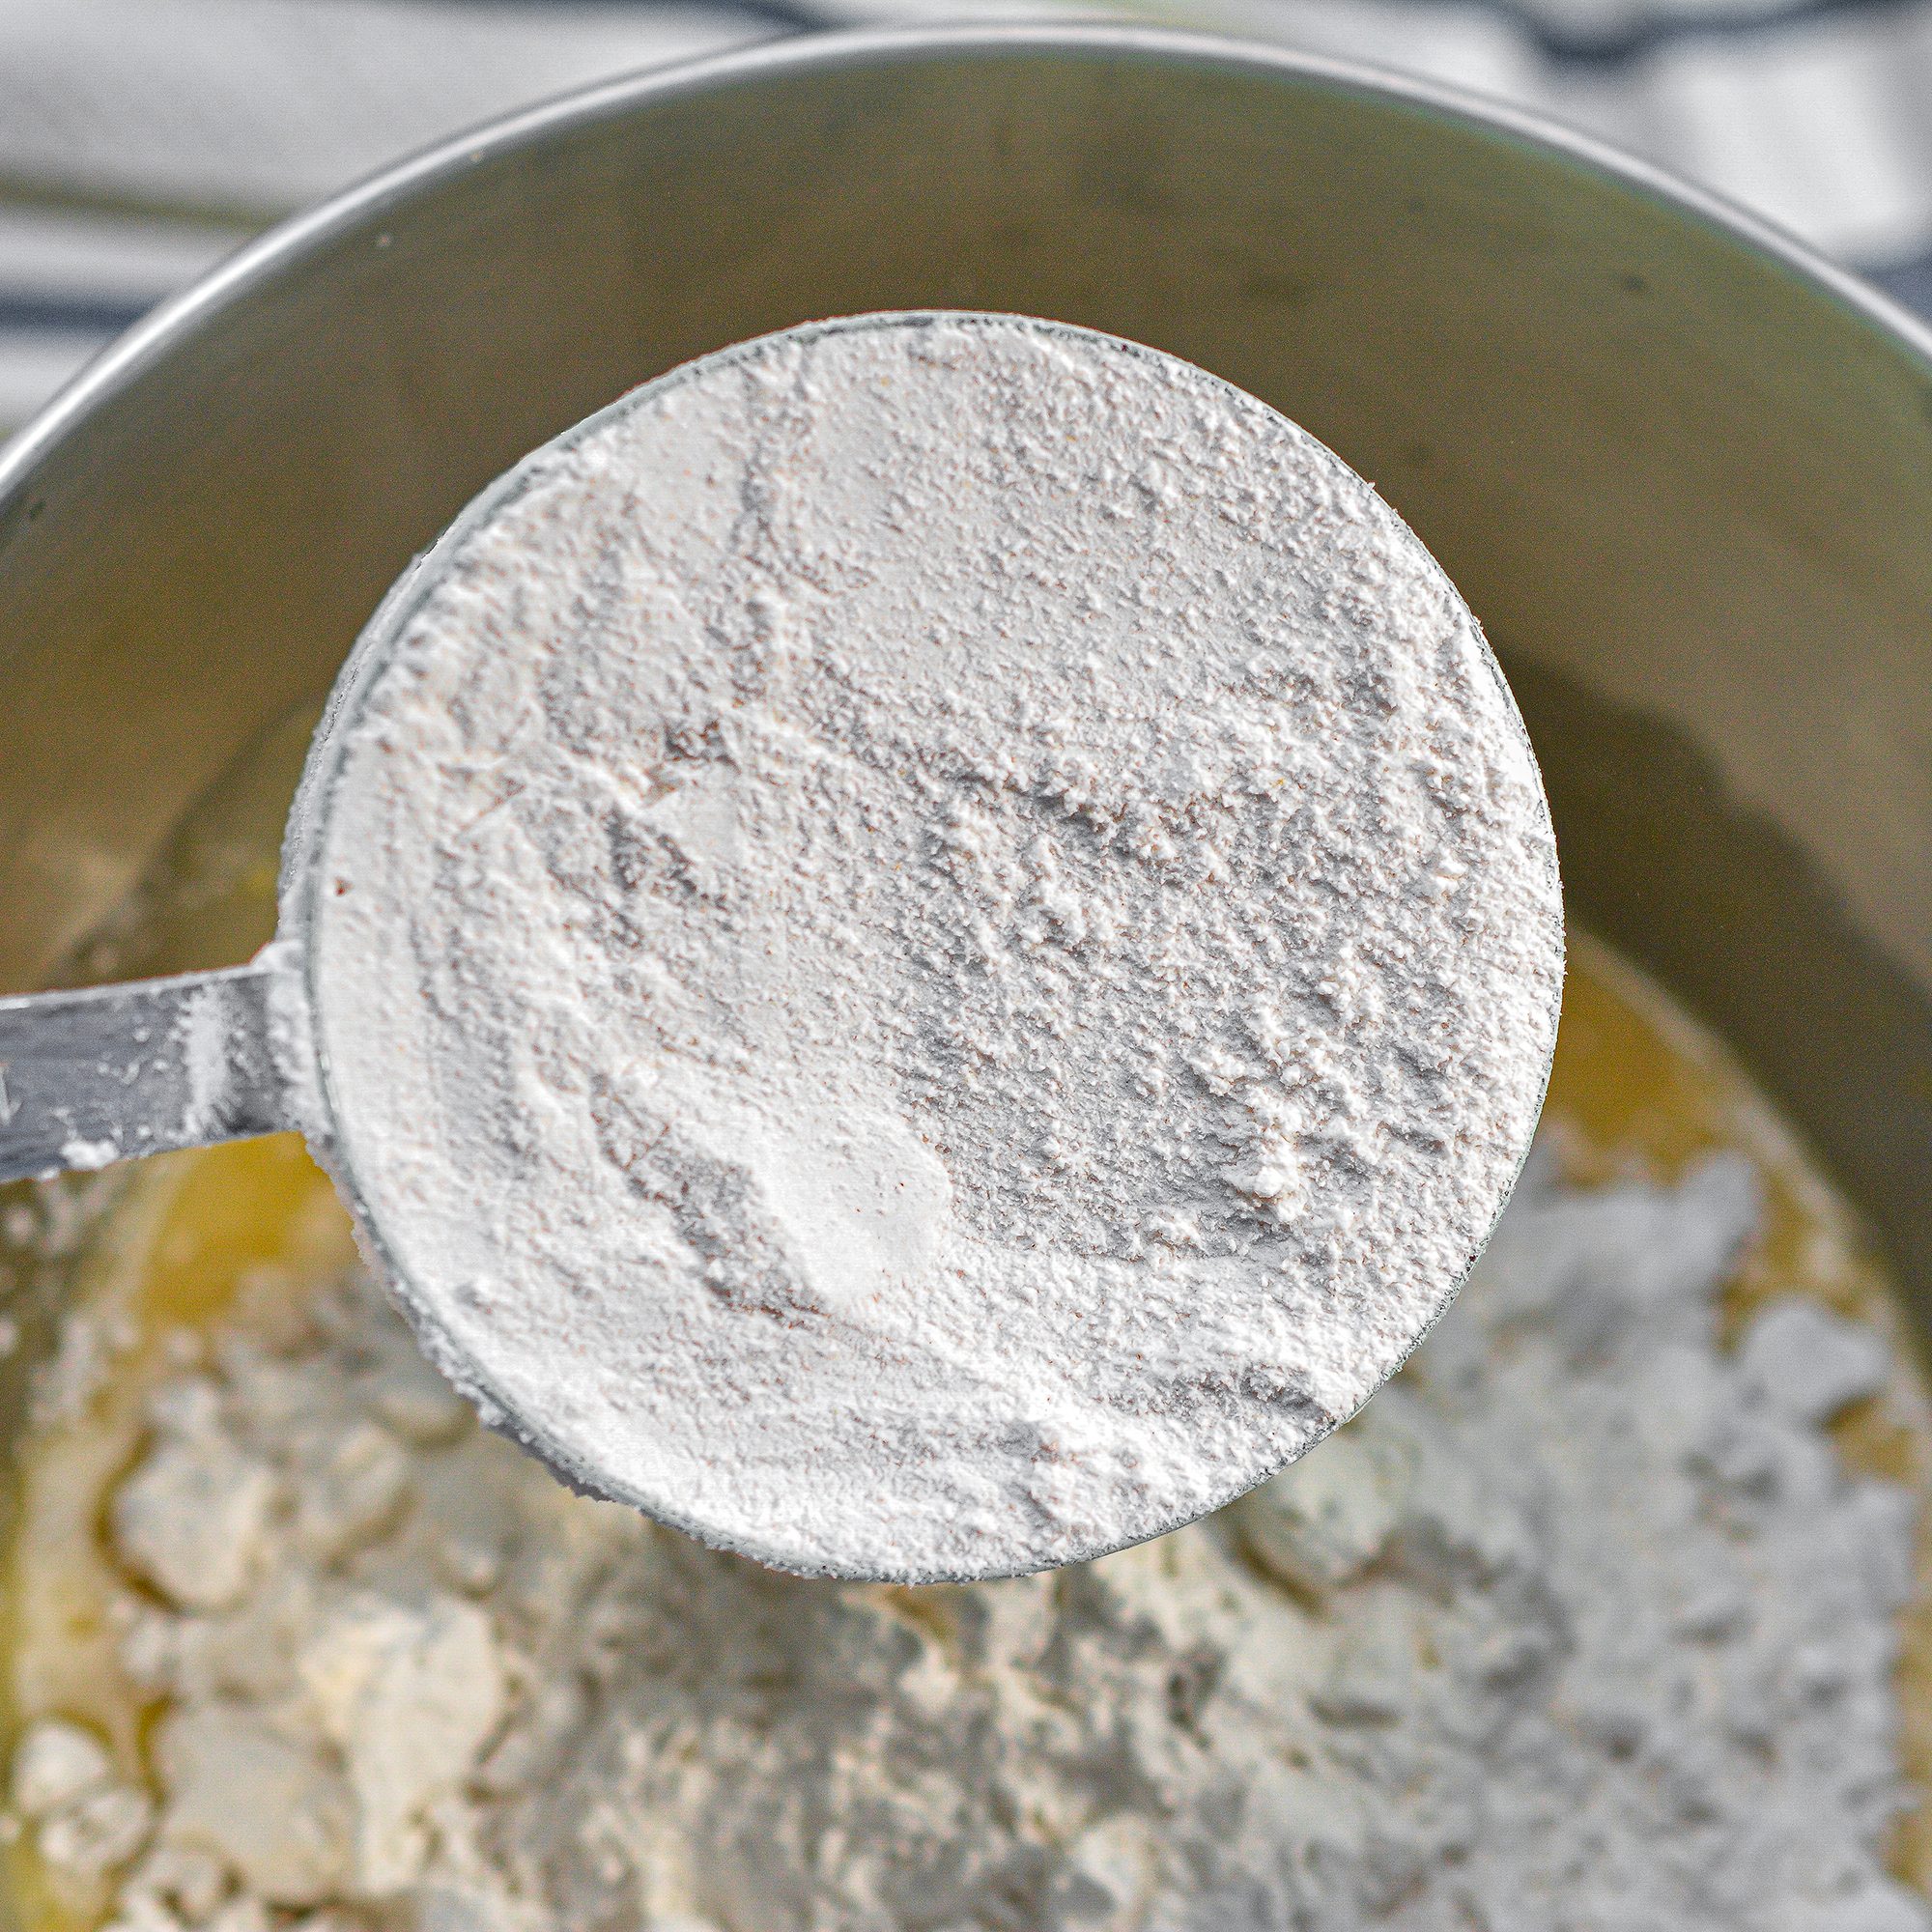 Place the flour, baking soda, baking powder and salt in the mixing bowl and beat until a smooth batter has formed.